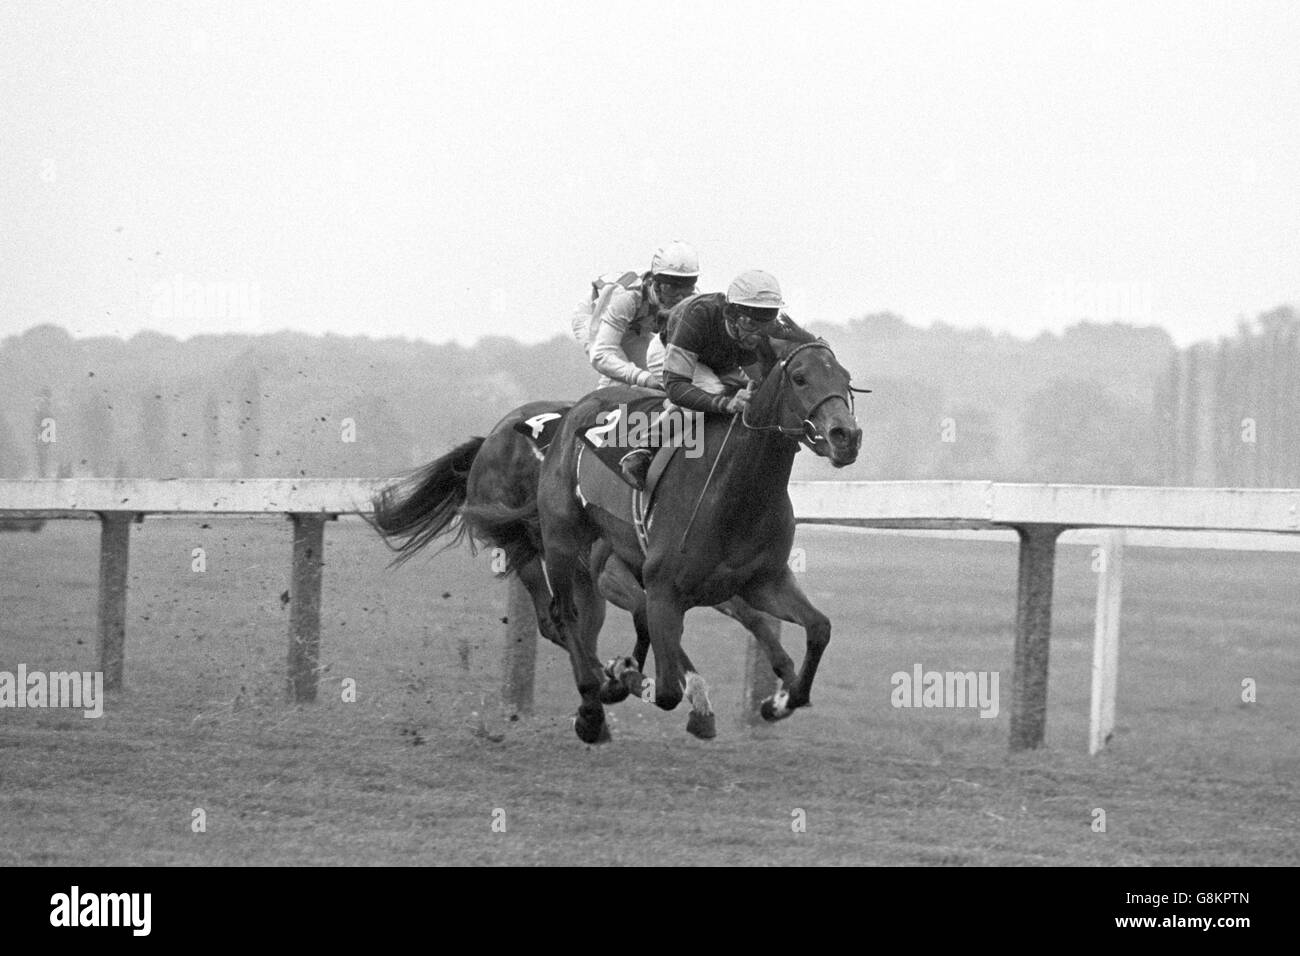 Lester Piggott on Circus Plume (no.2) winning today's Sir Charles Clore Memorial Stakes at Newbury, followed by Walter Swinburn on Leipzig. Third was Ballinderry, ridden by Pat Eddery. Stock Photo